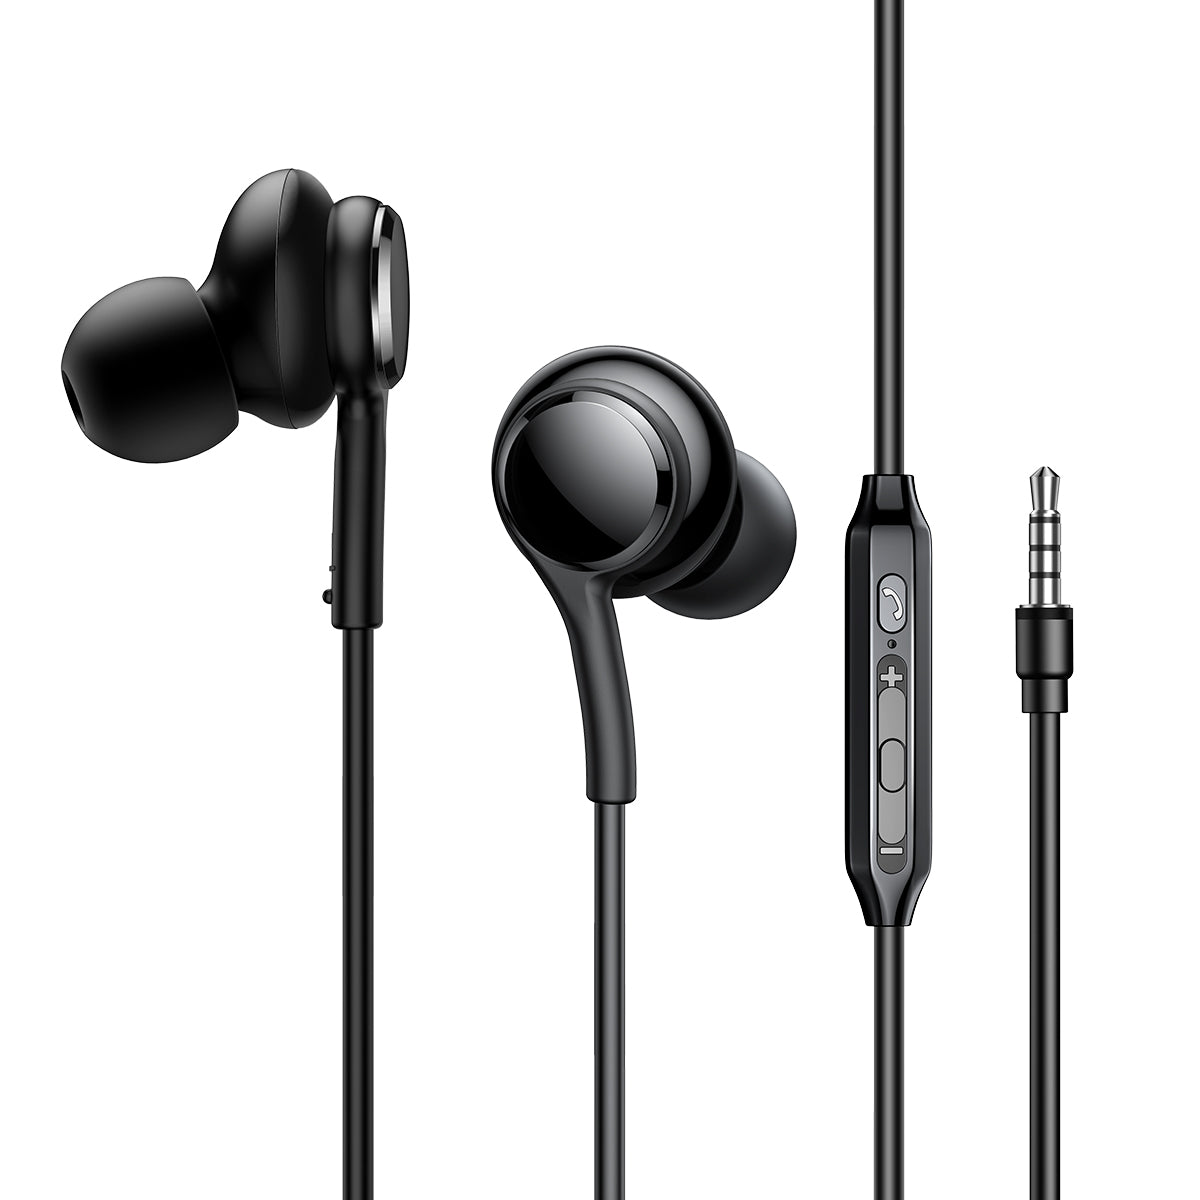 JR-EW02 Wired Series In-Ear Wired Earbuds